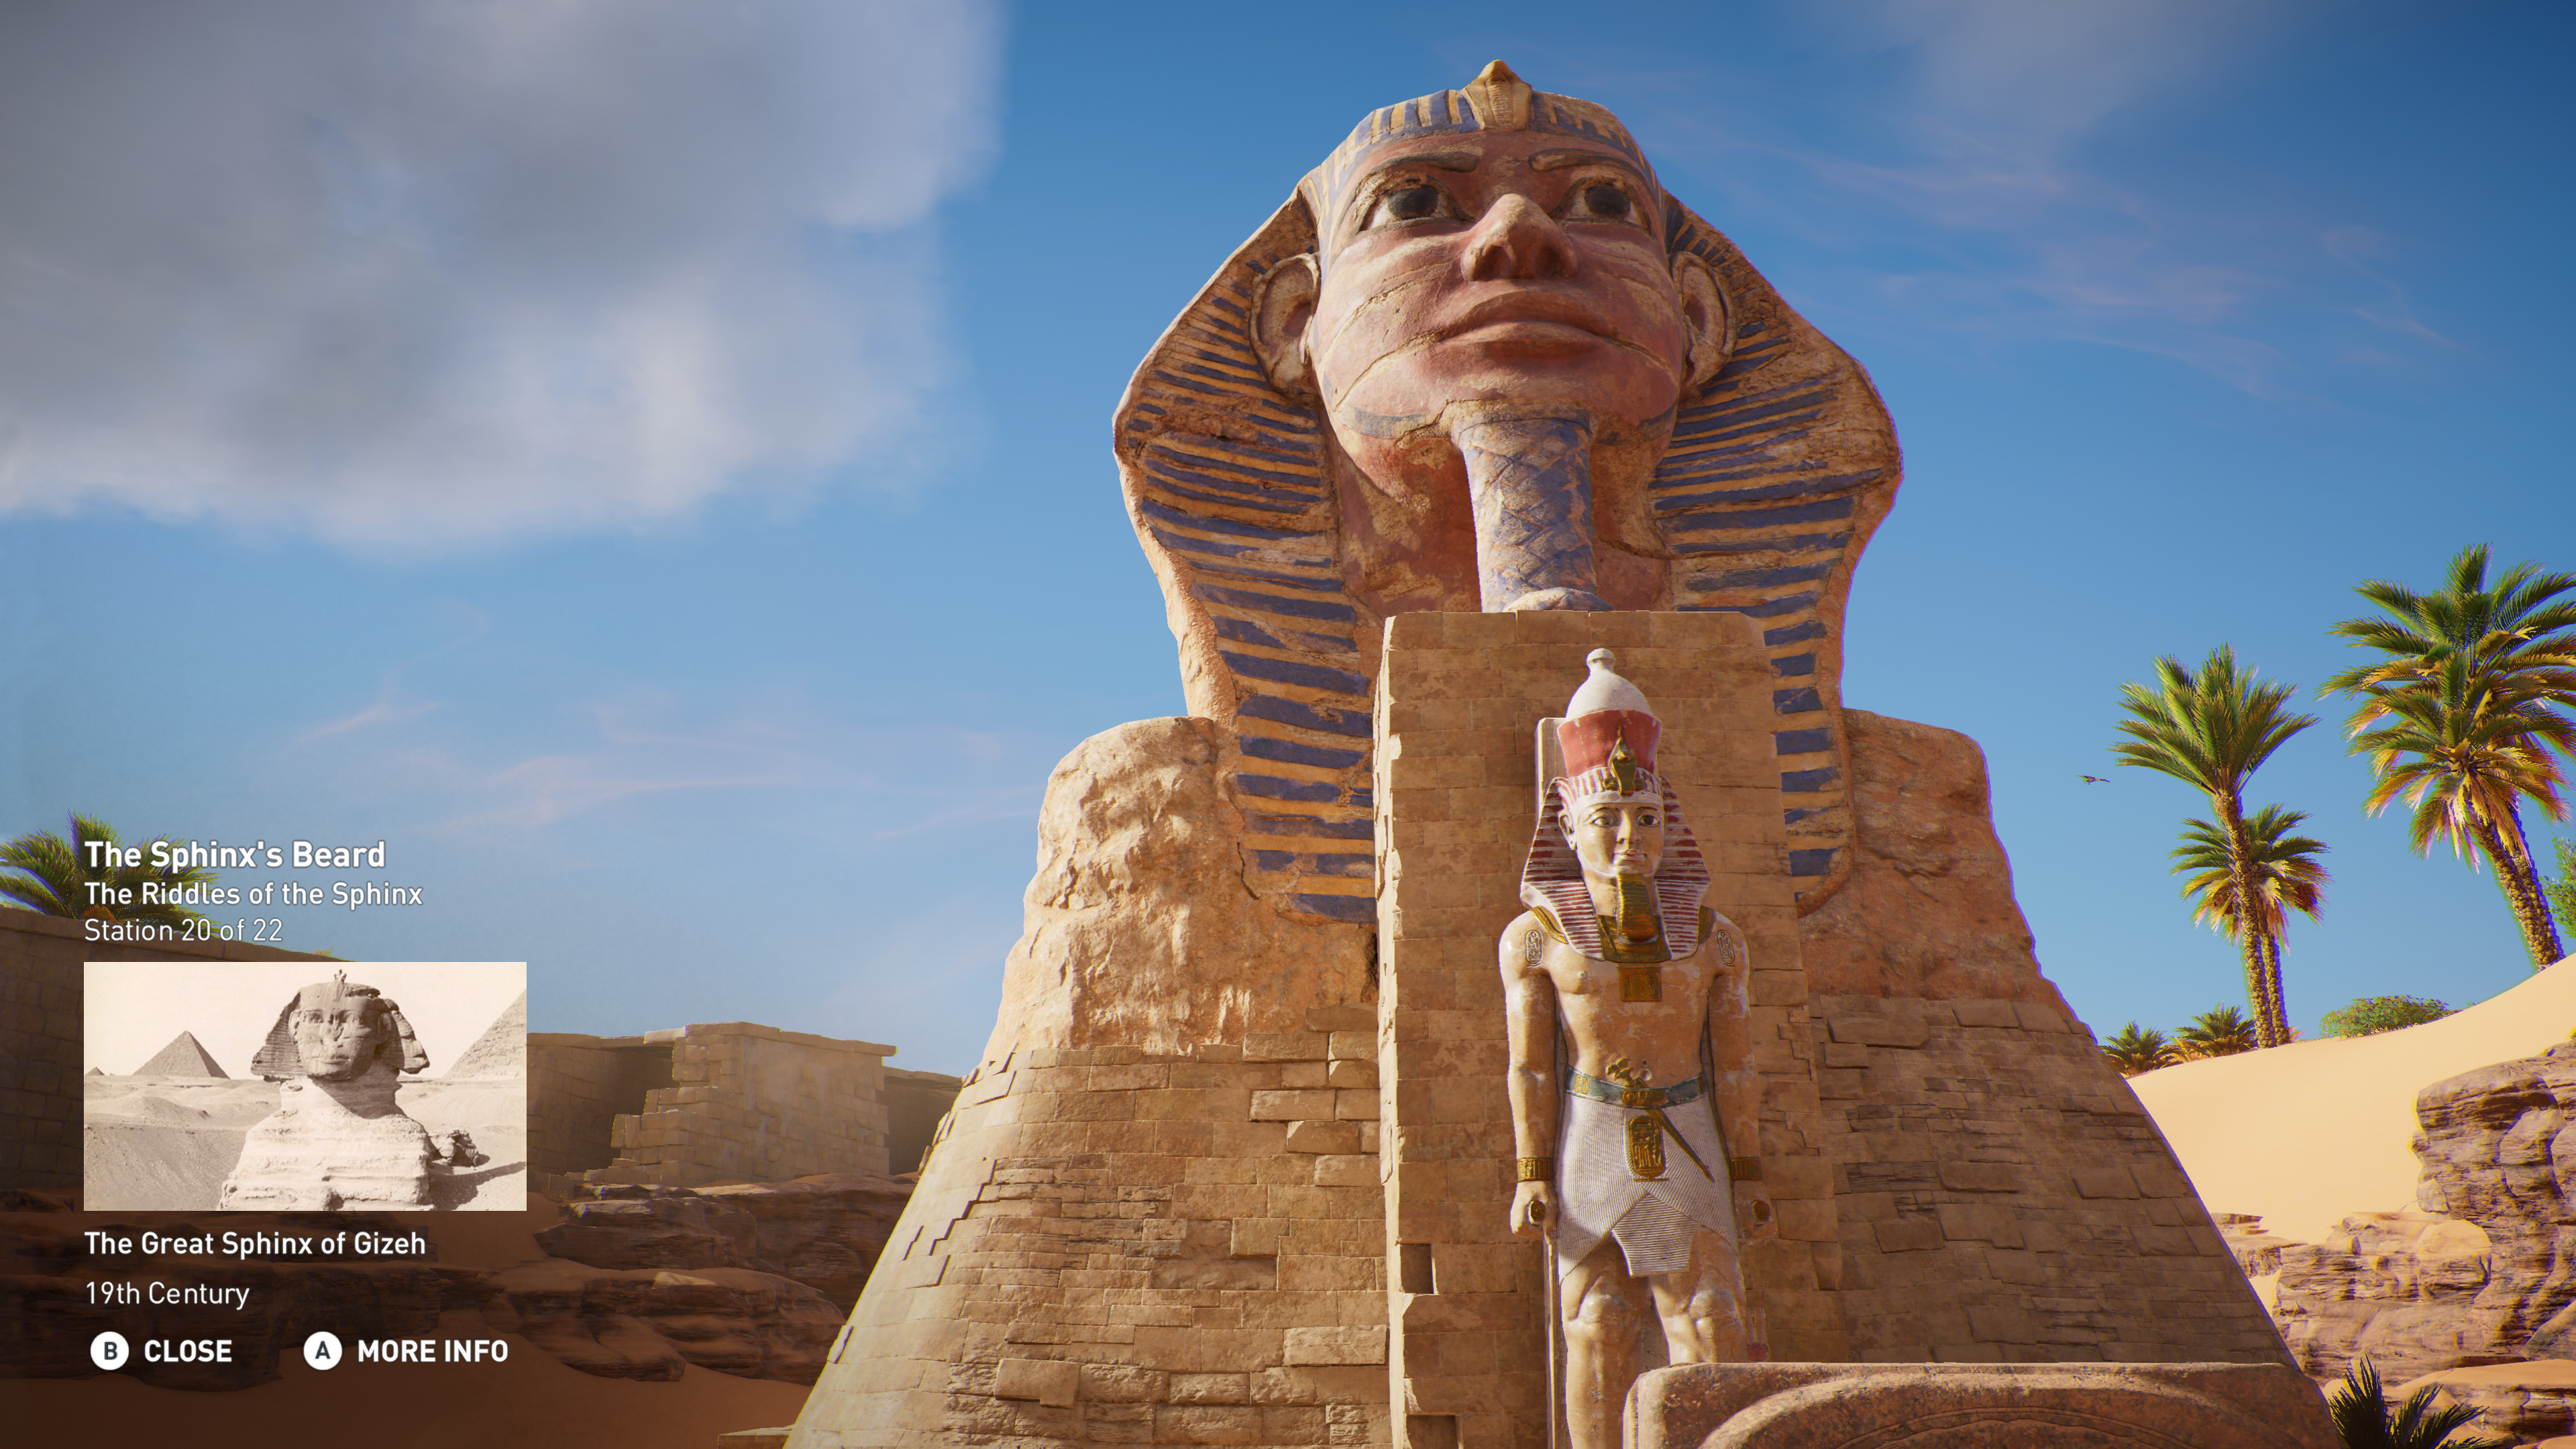 Assassin's Creed Origins: the Journey through Ancient Egypt